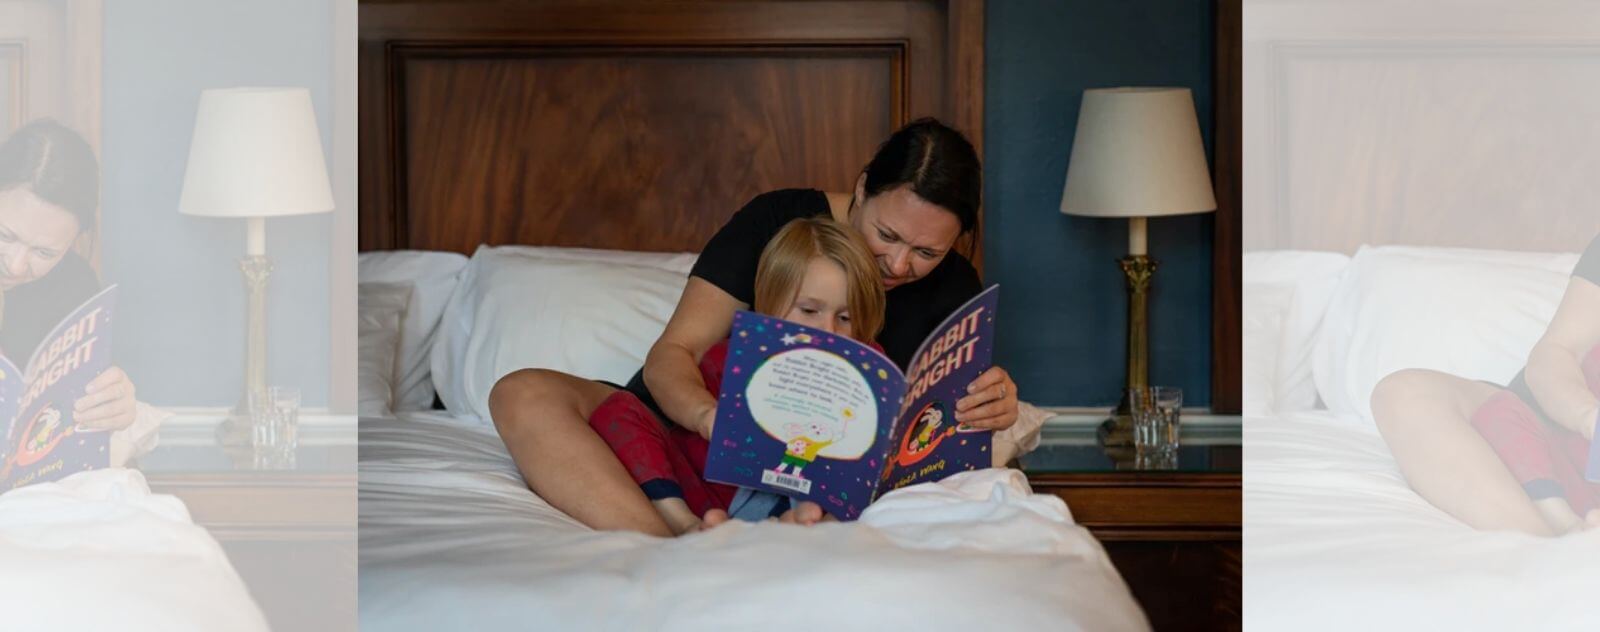 Mom Reading a Magical Story in the Evening to Her Child in Bed to Put Him to Sleep